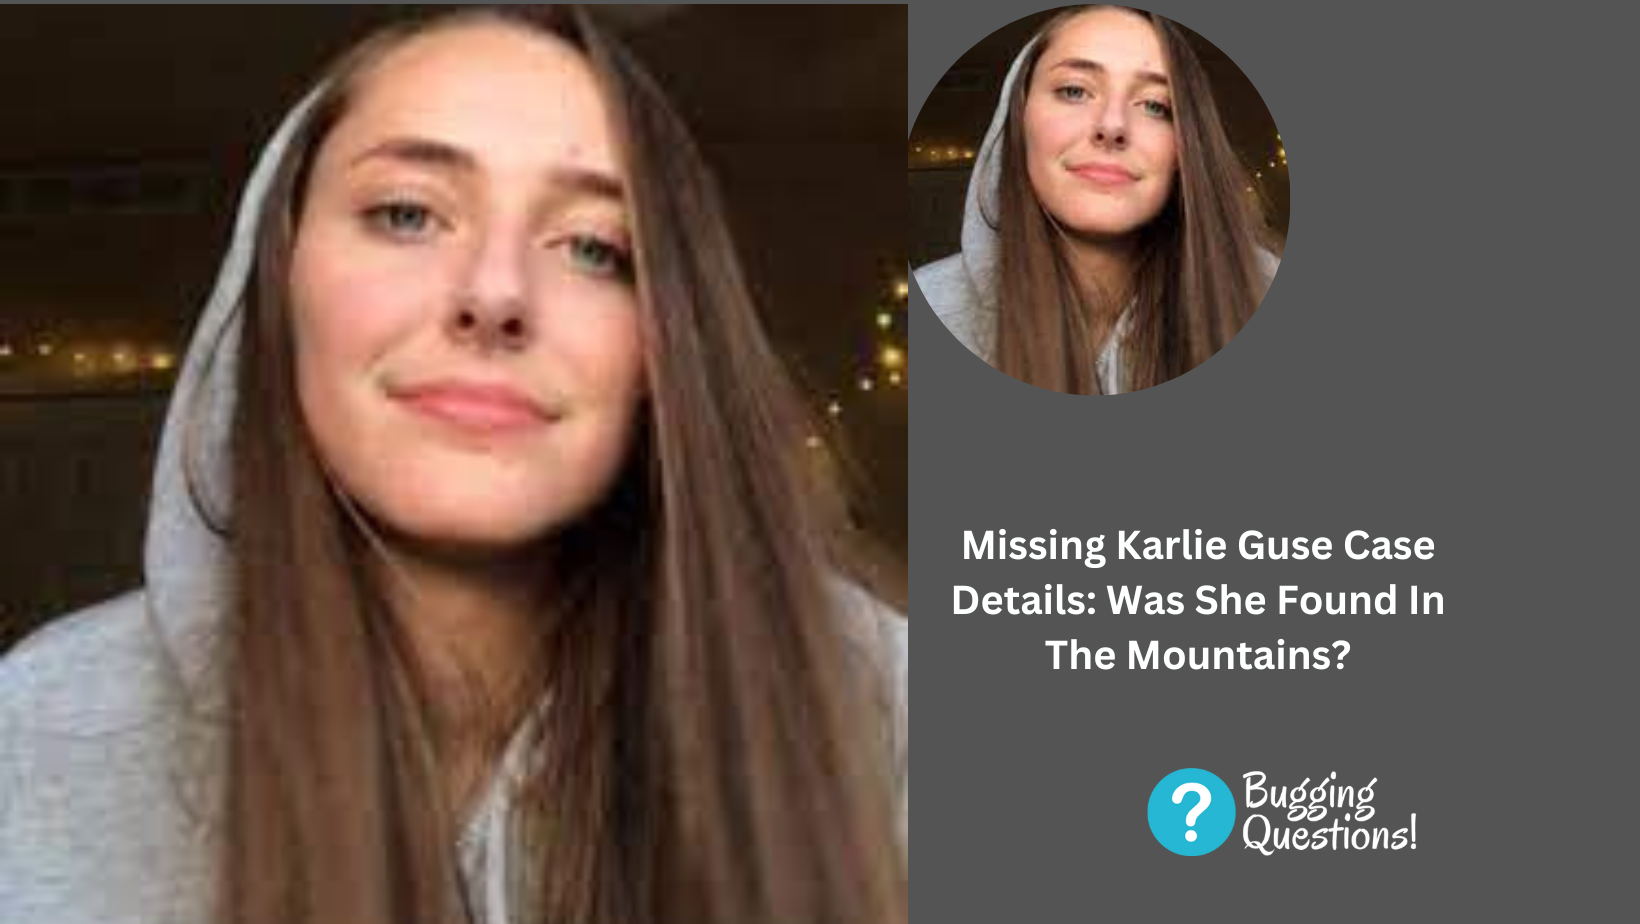 Missing Karlie Guse Case Details: Was She Found In The Mountains?